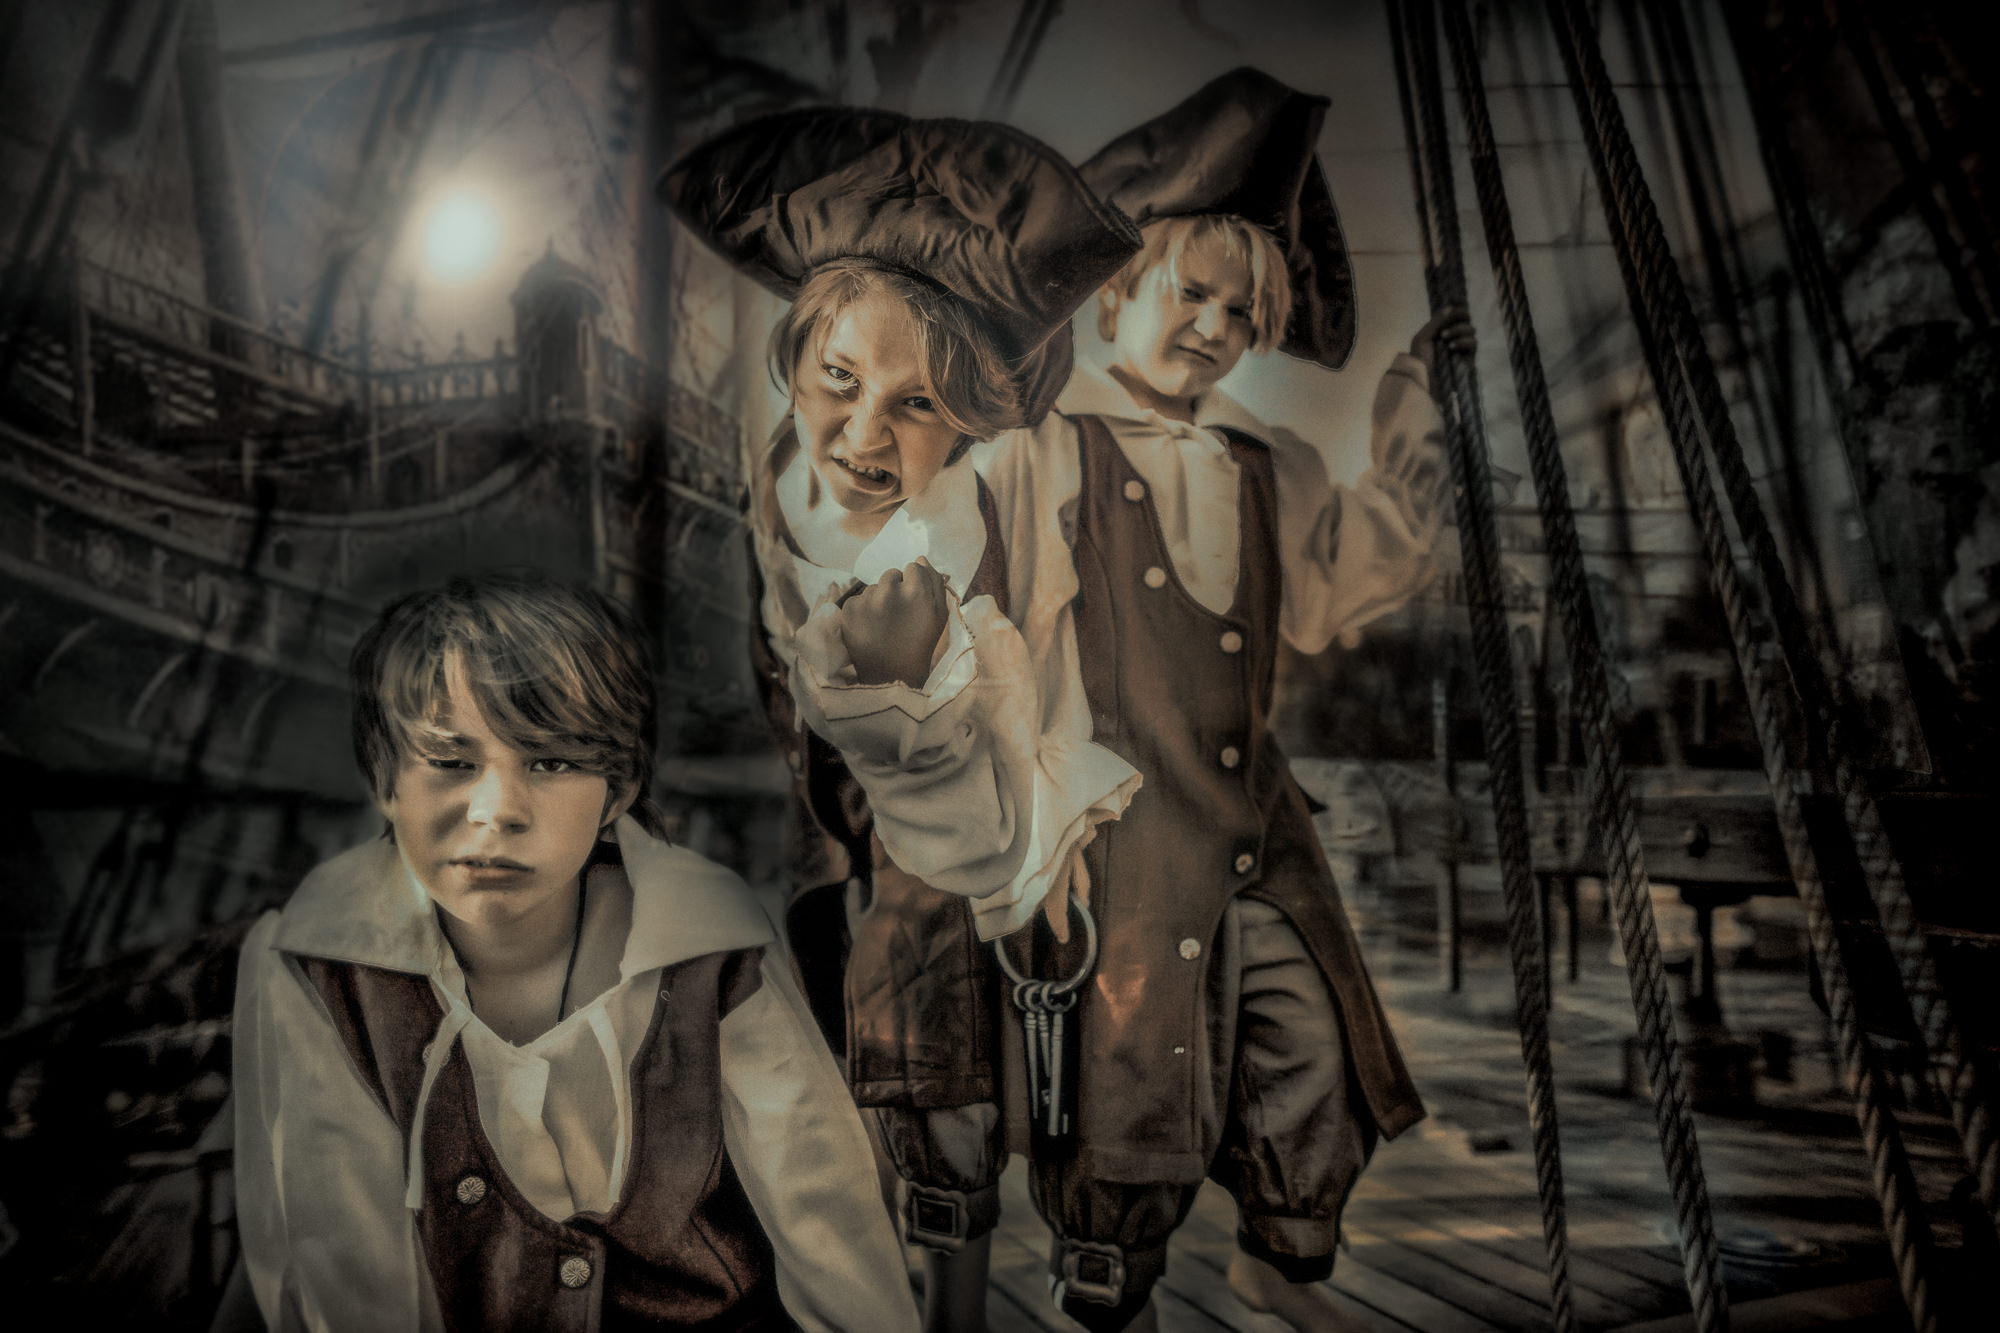 Wilmington NC Photographer - Creative Photography - Photo of 3 boys dressed  up as pirates -  Styled Photo Session -  Wilmingotn NC Photography Studio - Chris Lang Photography 